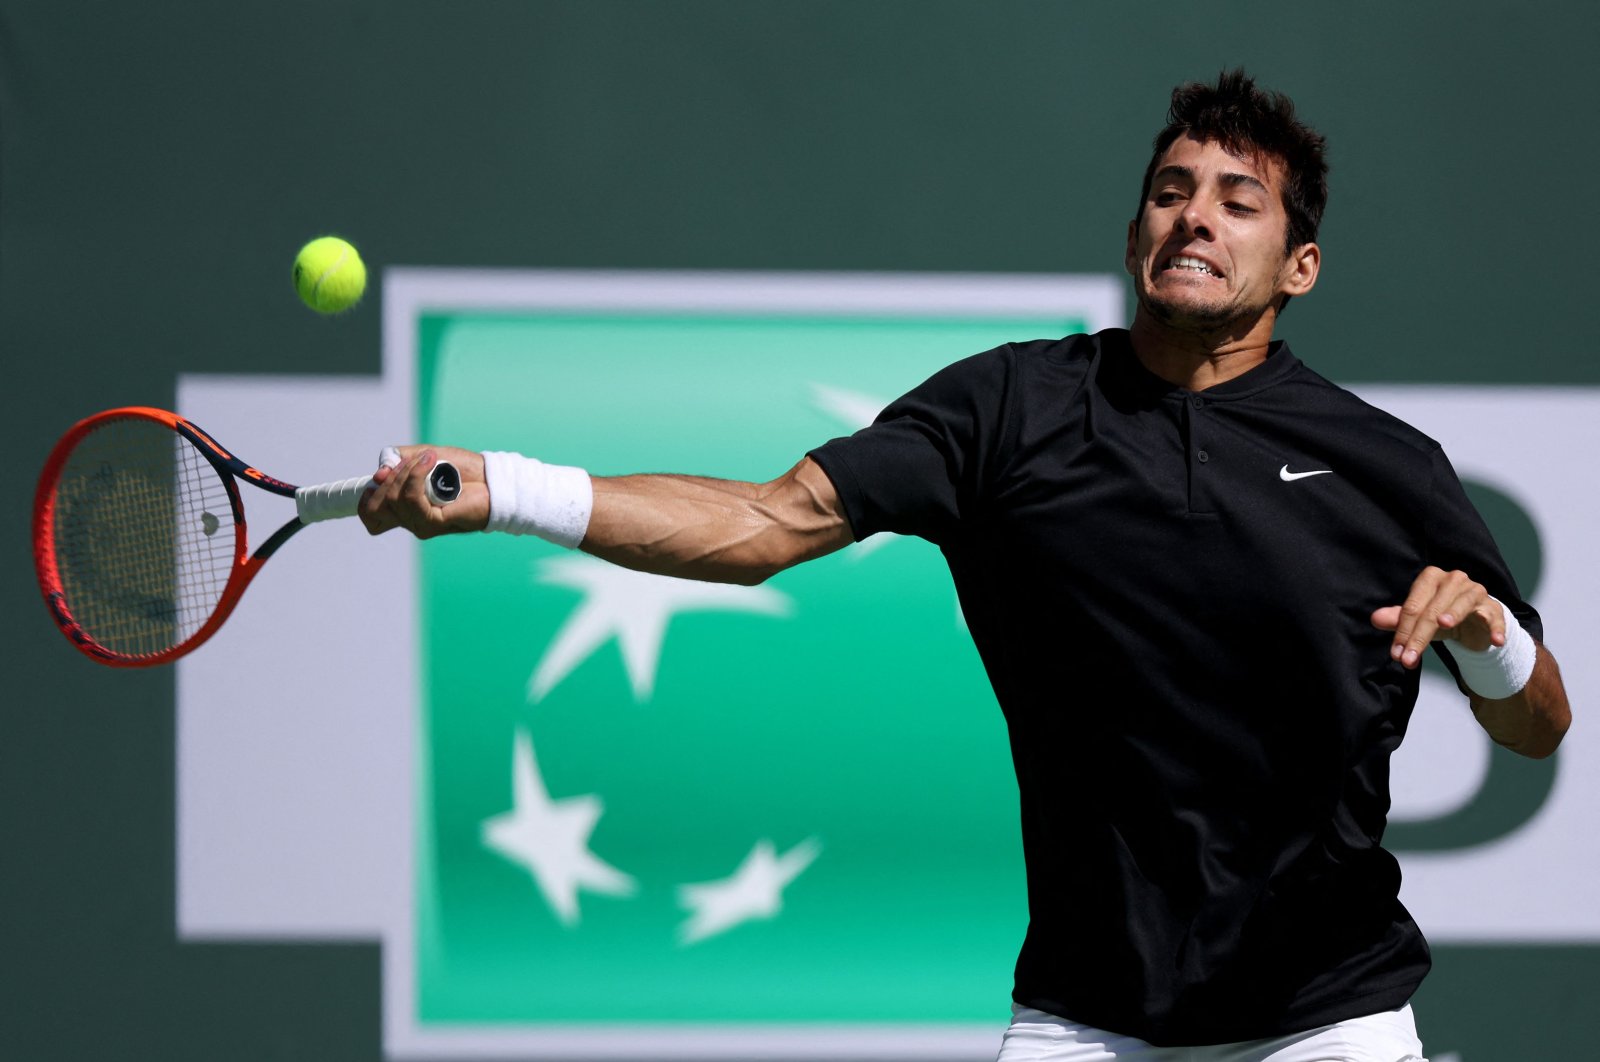 Chilean Cristian Garin plays a forehand in his match against Casper Ruud of Norway during the BNP Paribas at the Indian Wells Tennis Garden, Indian Wells, California, U.S., March 12, 2023. (AFP Photo)